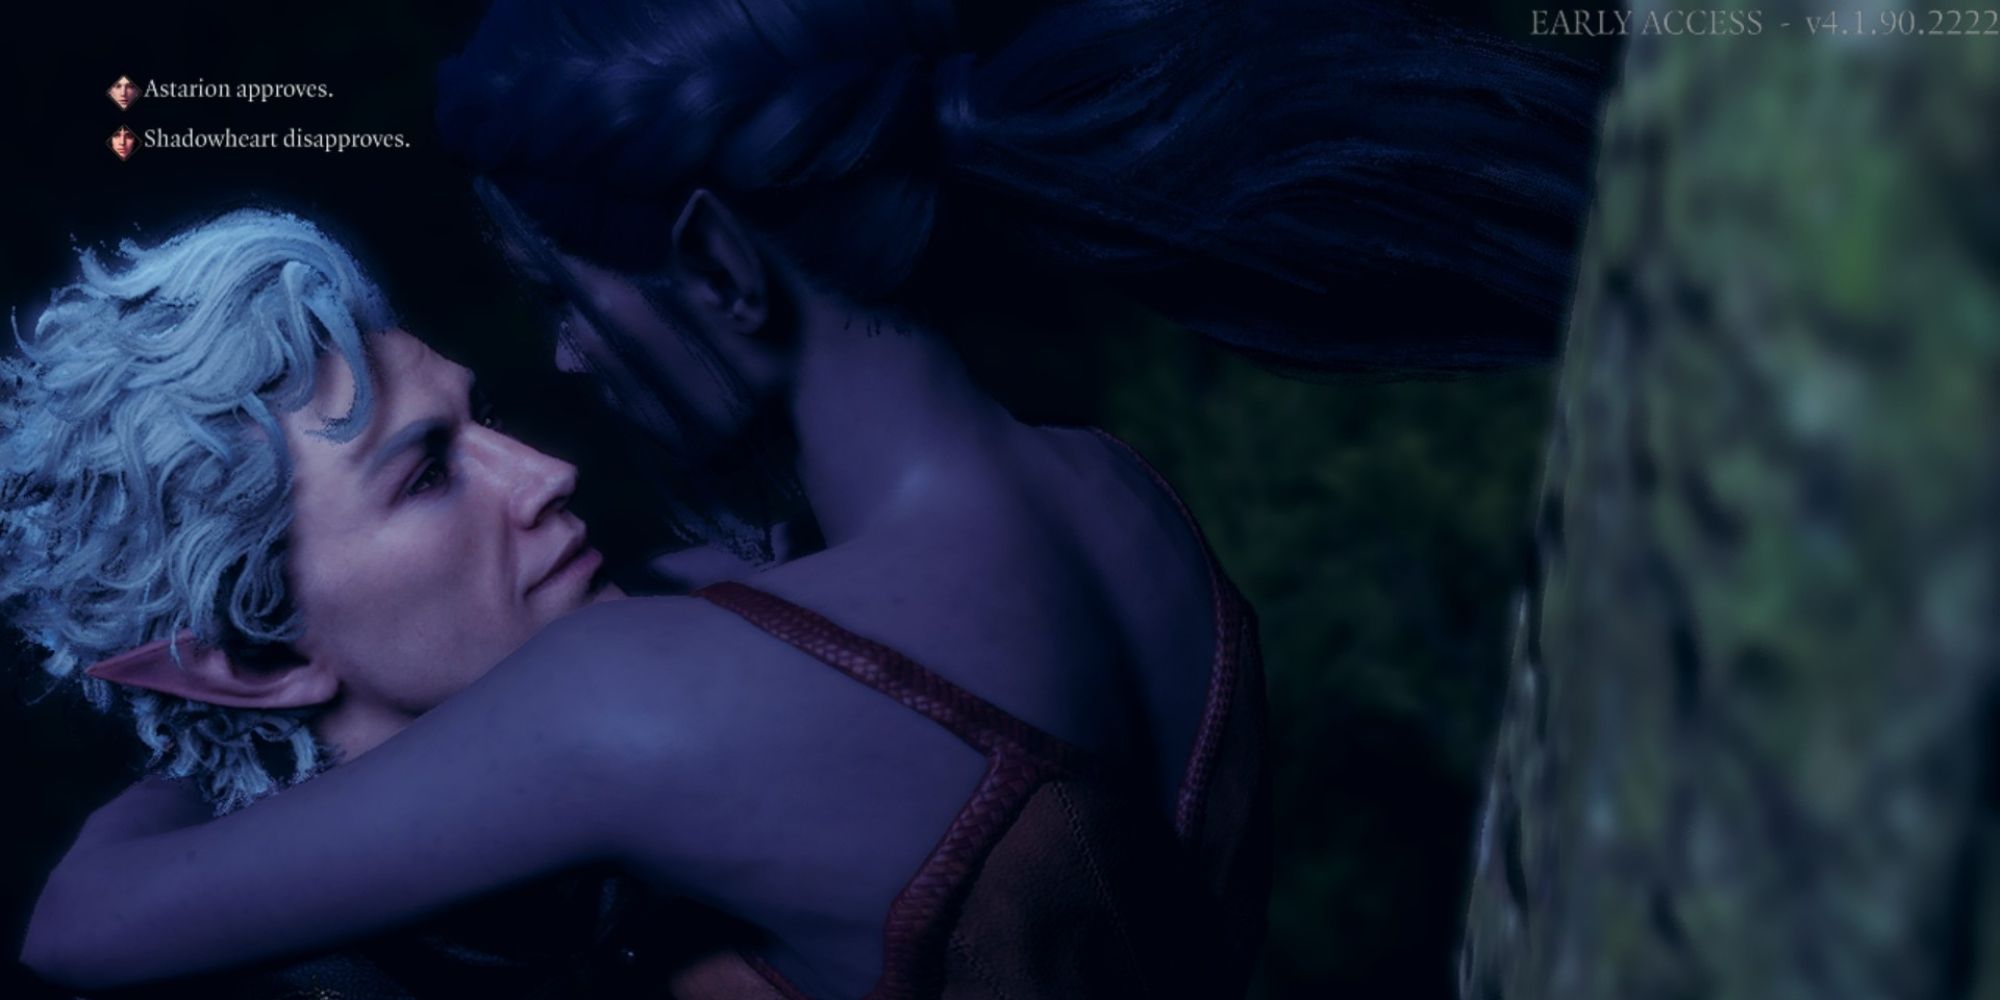 Astarrion holding player character up during romance